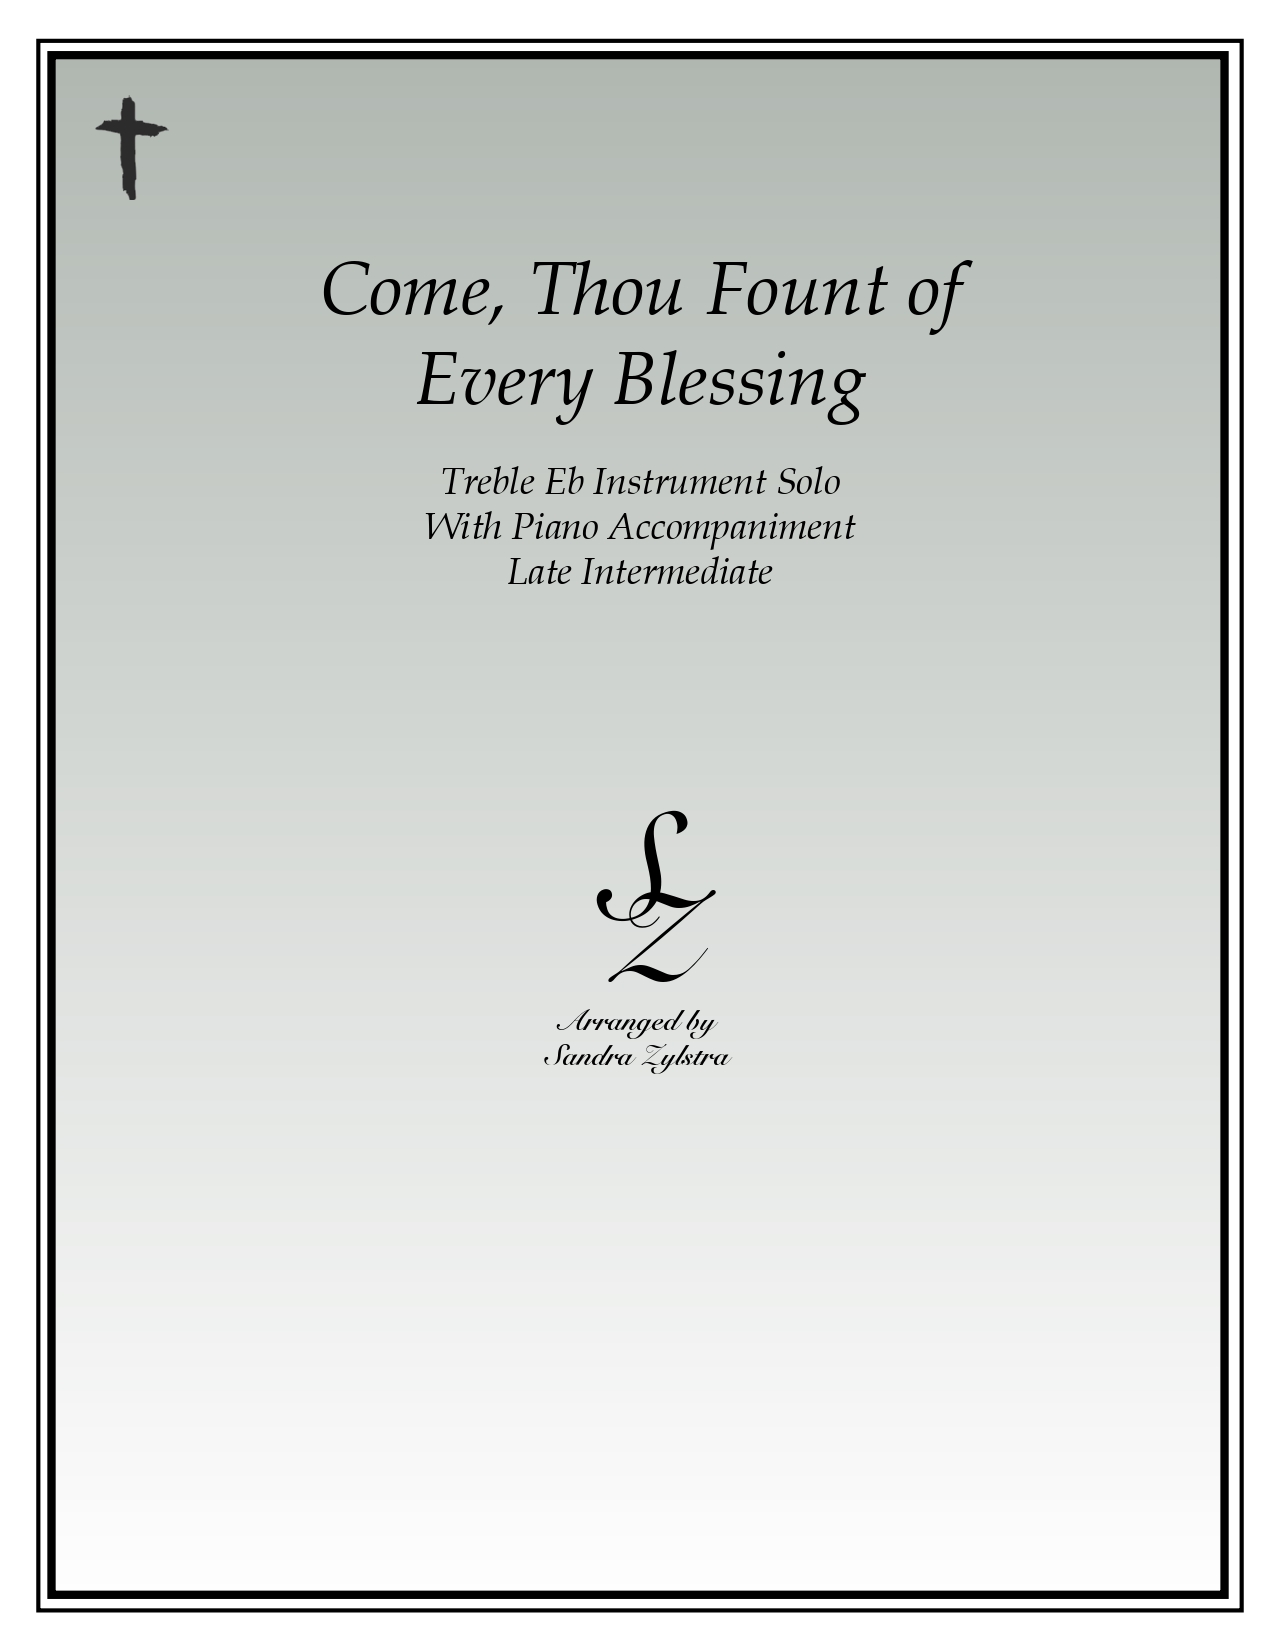 Come Thou Fount Of Every Blessing Eb instrument solo part cover page 00011